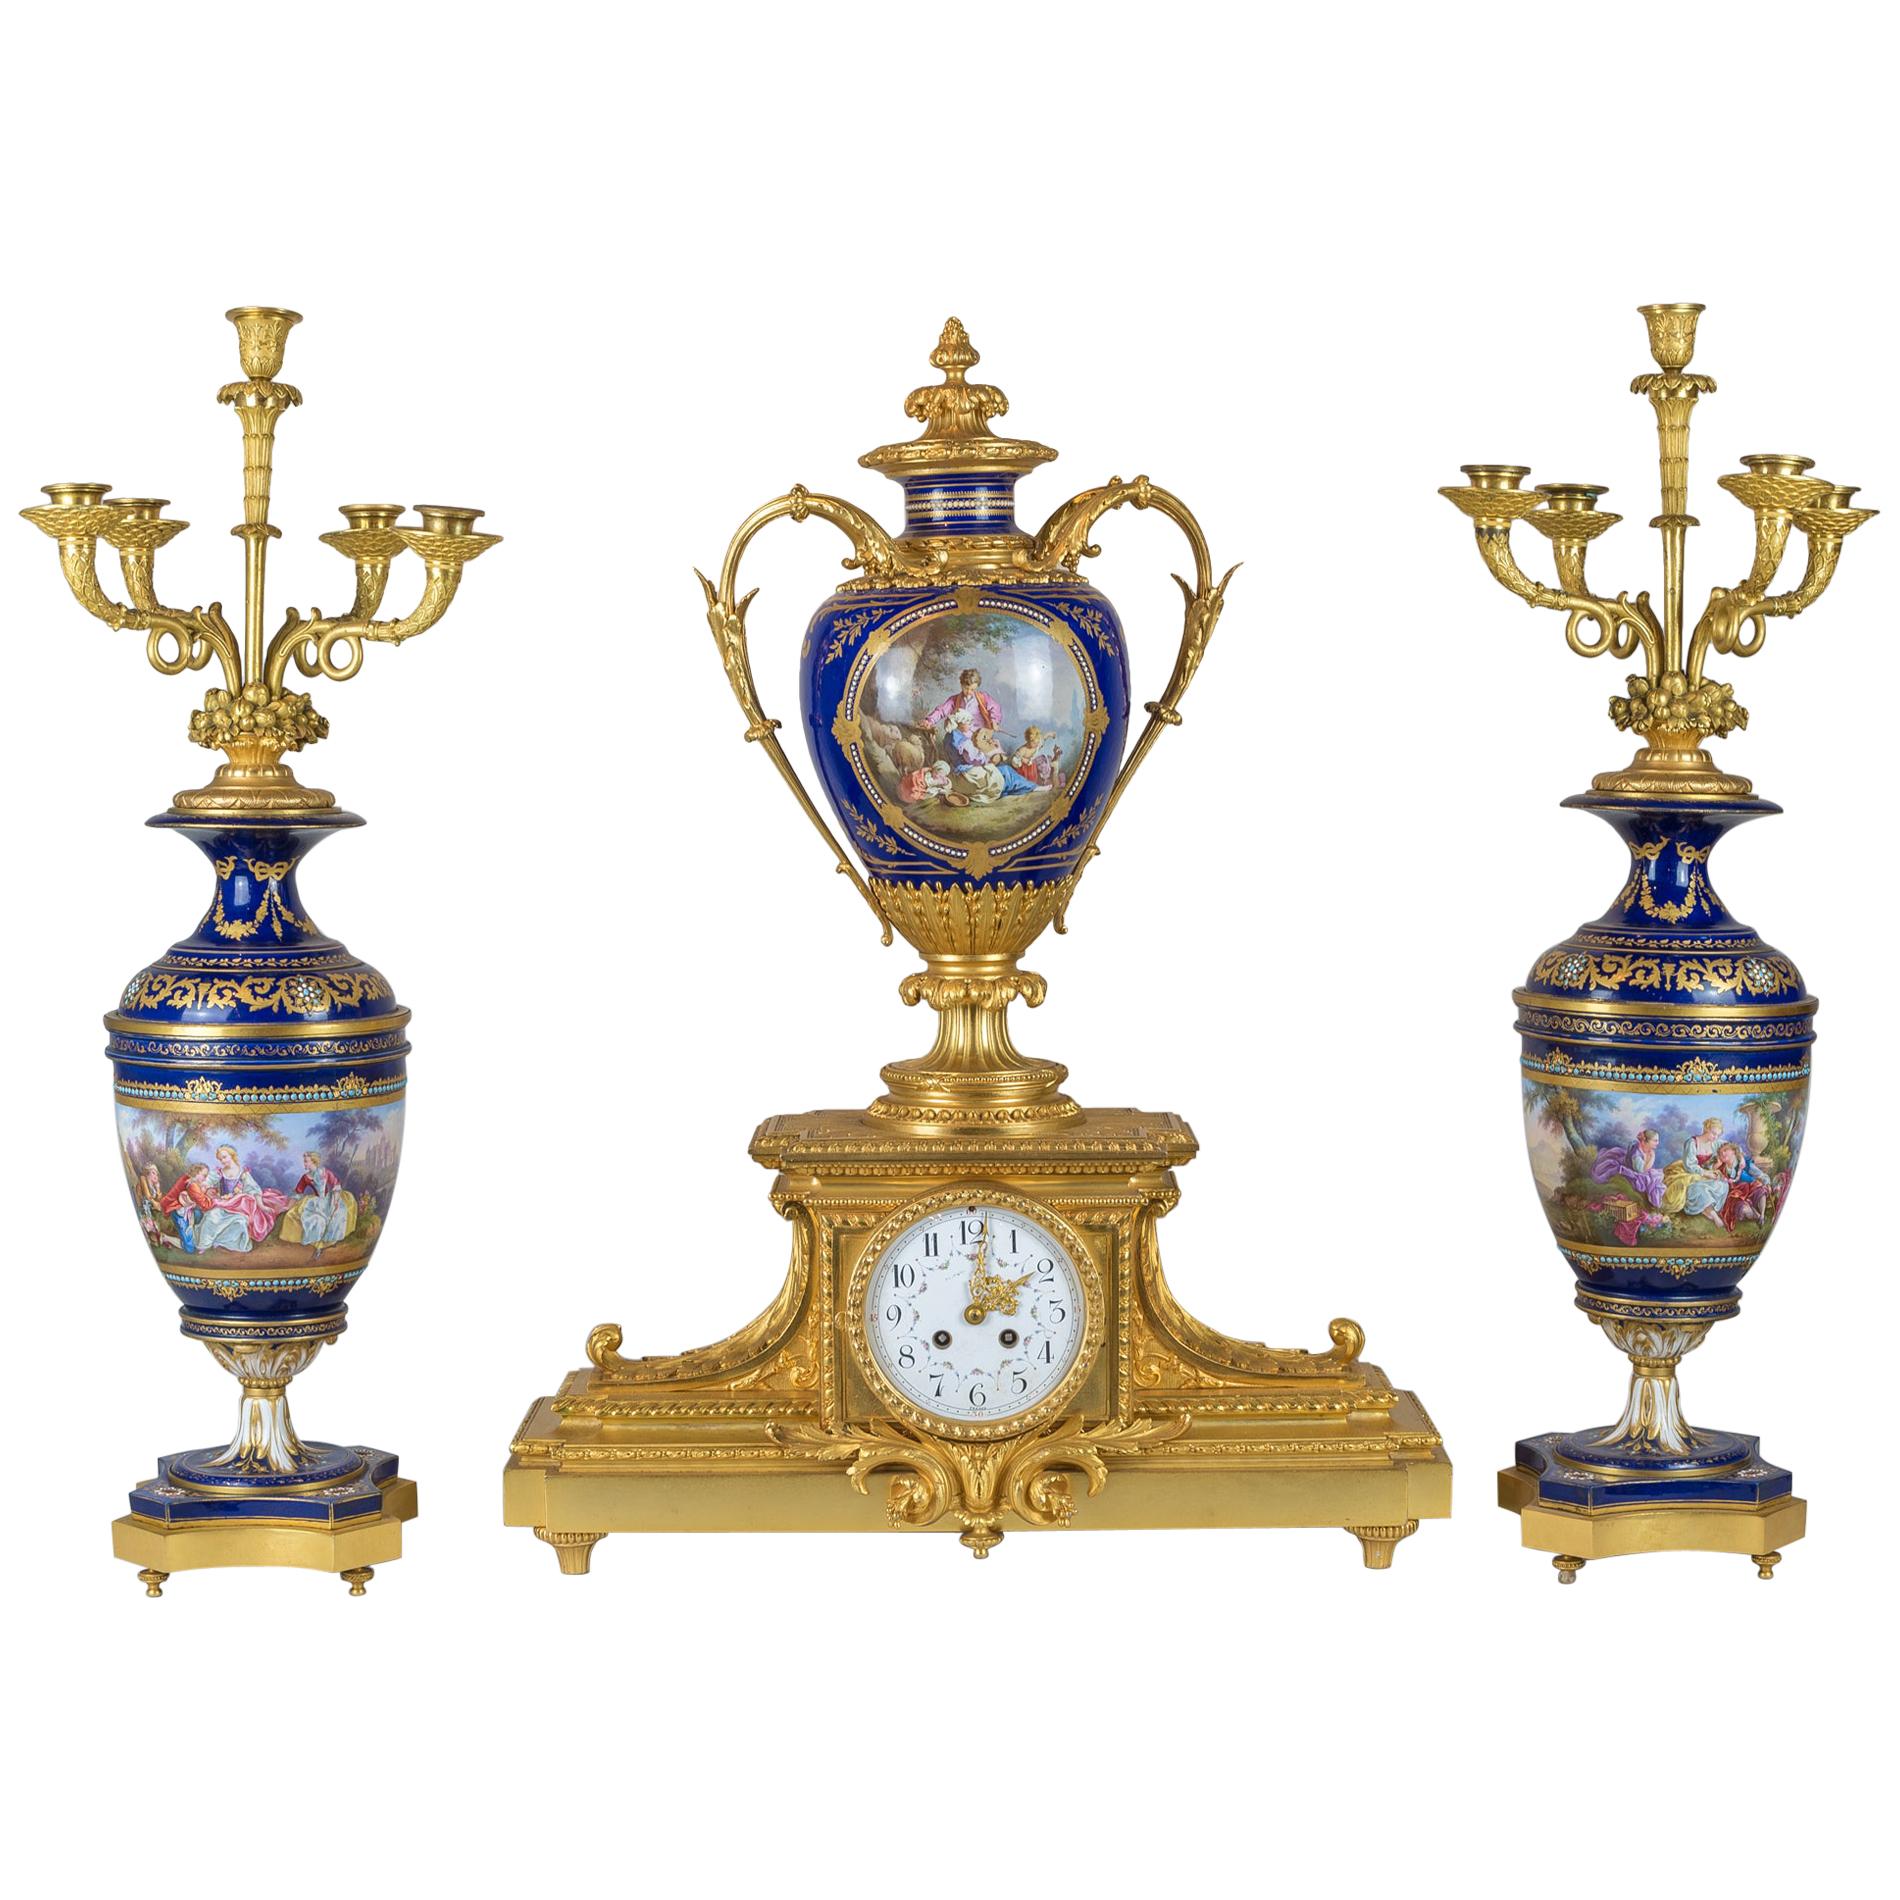 19th Century Sèvres Style Ormolu and Painted Porcelain Clock Set